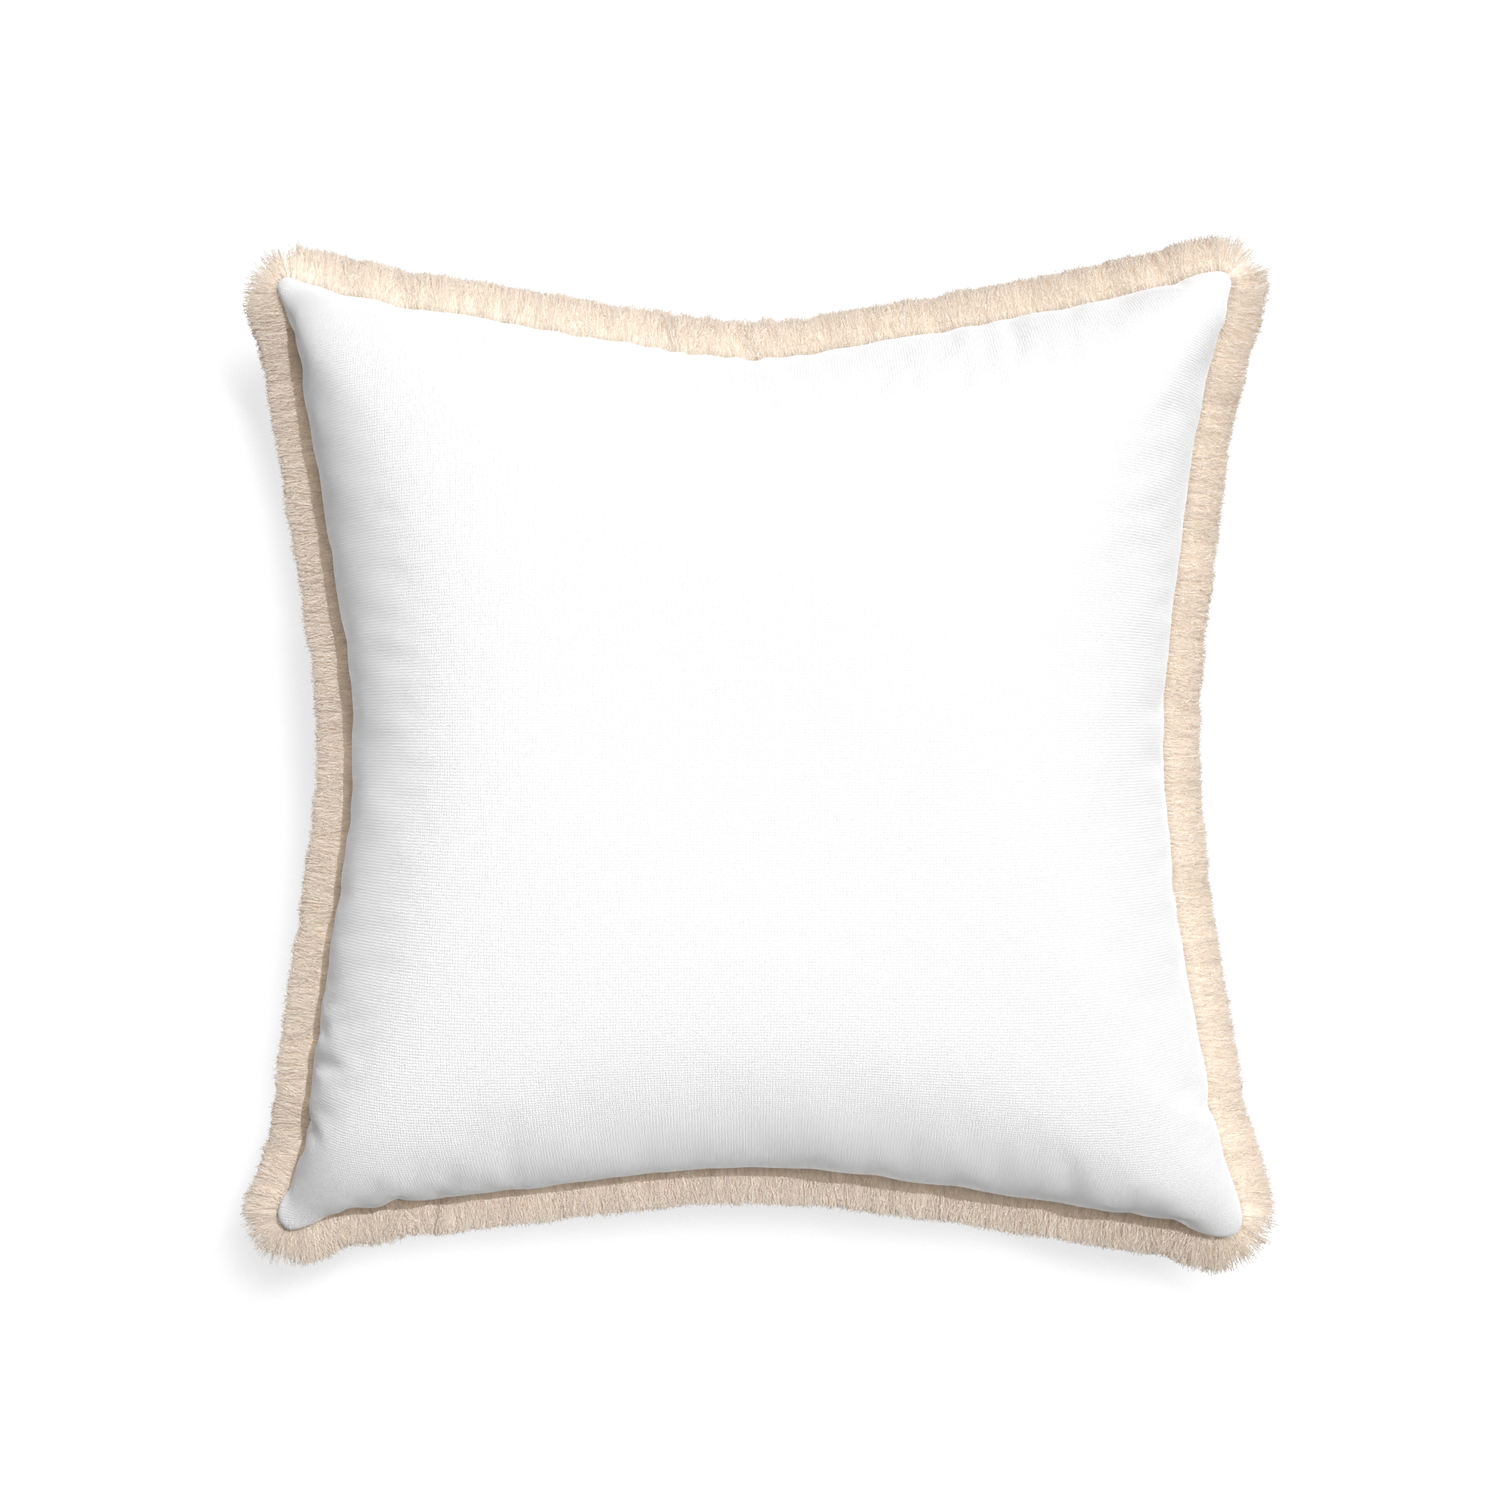 22-square snow custom pillow with cream fringe on white background